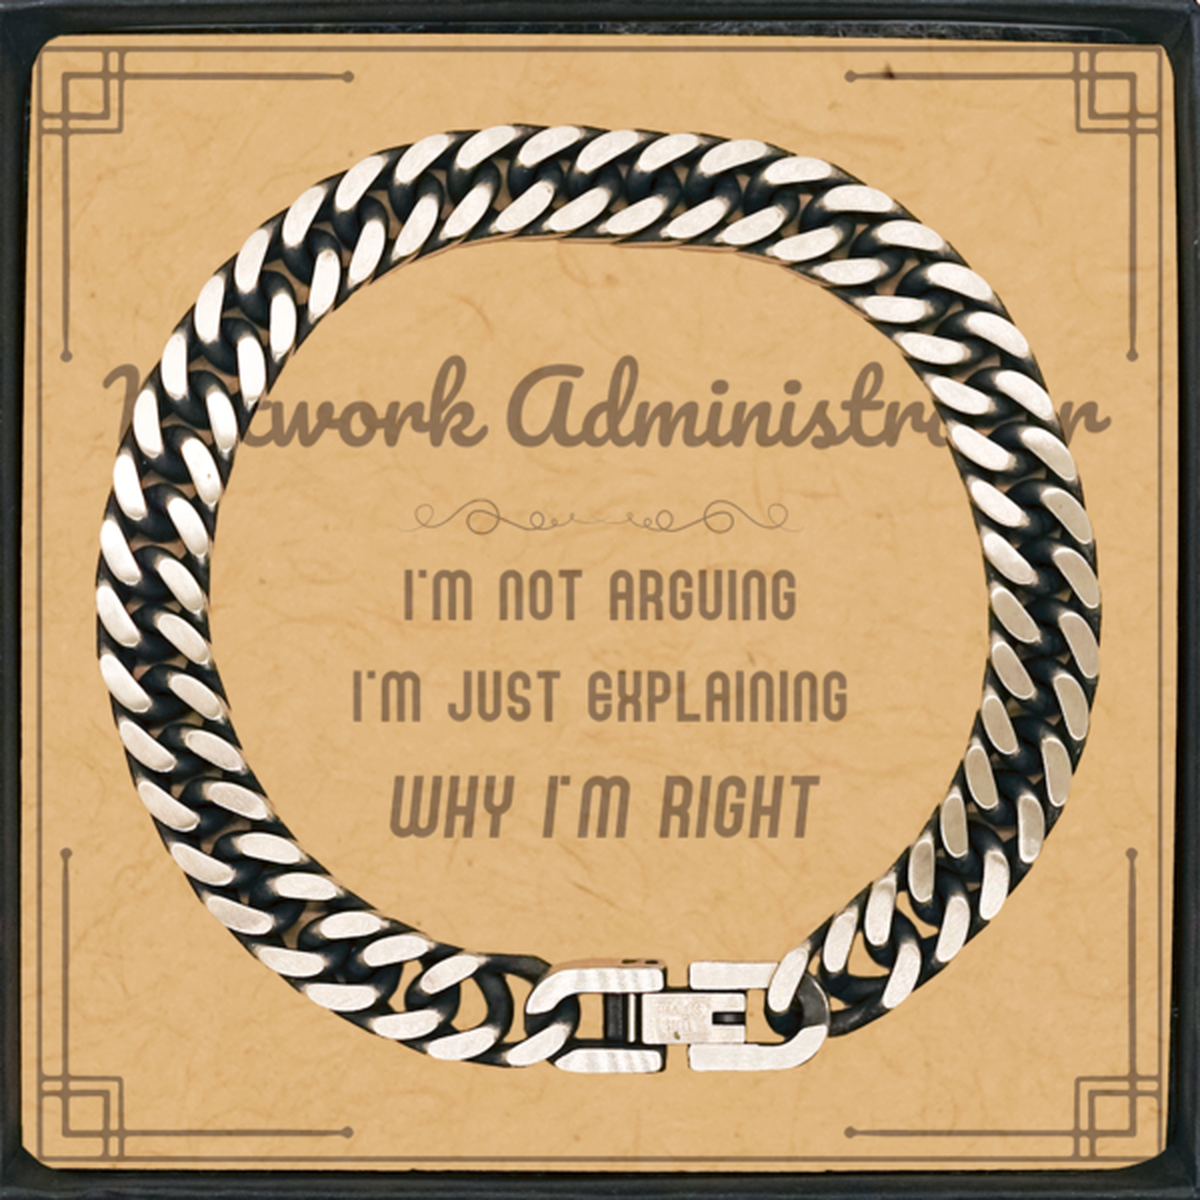 Network Administrator I'm not Arguing. I'm Just Explaining Why I'm RIGHT Cuban Link Chain Bracelet, Funny Saying Quote Network Administrator Gifts For Network Administrator Message Card Graduation Birthday Christmas Gifts for Men Women Coworker